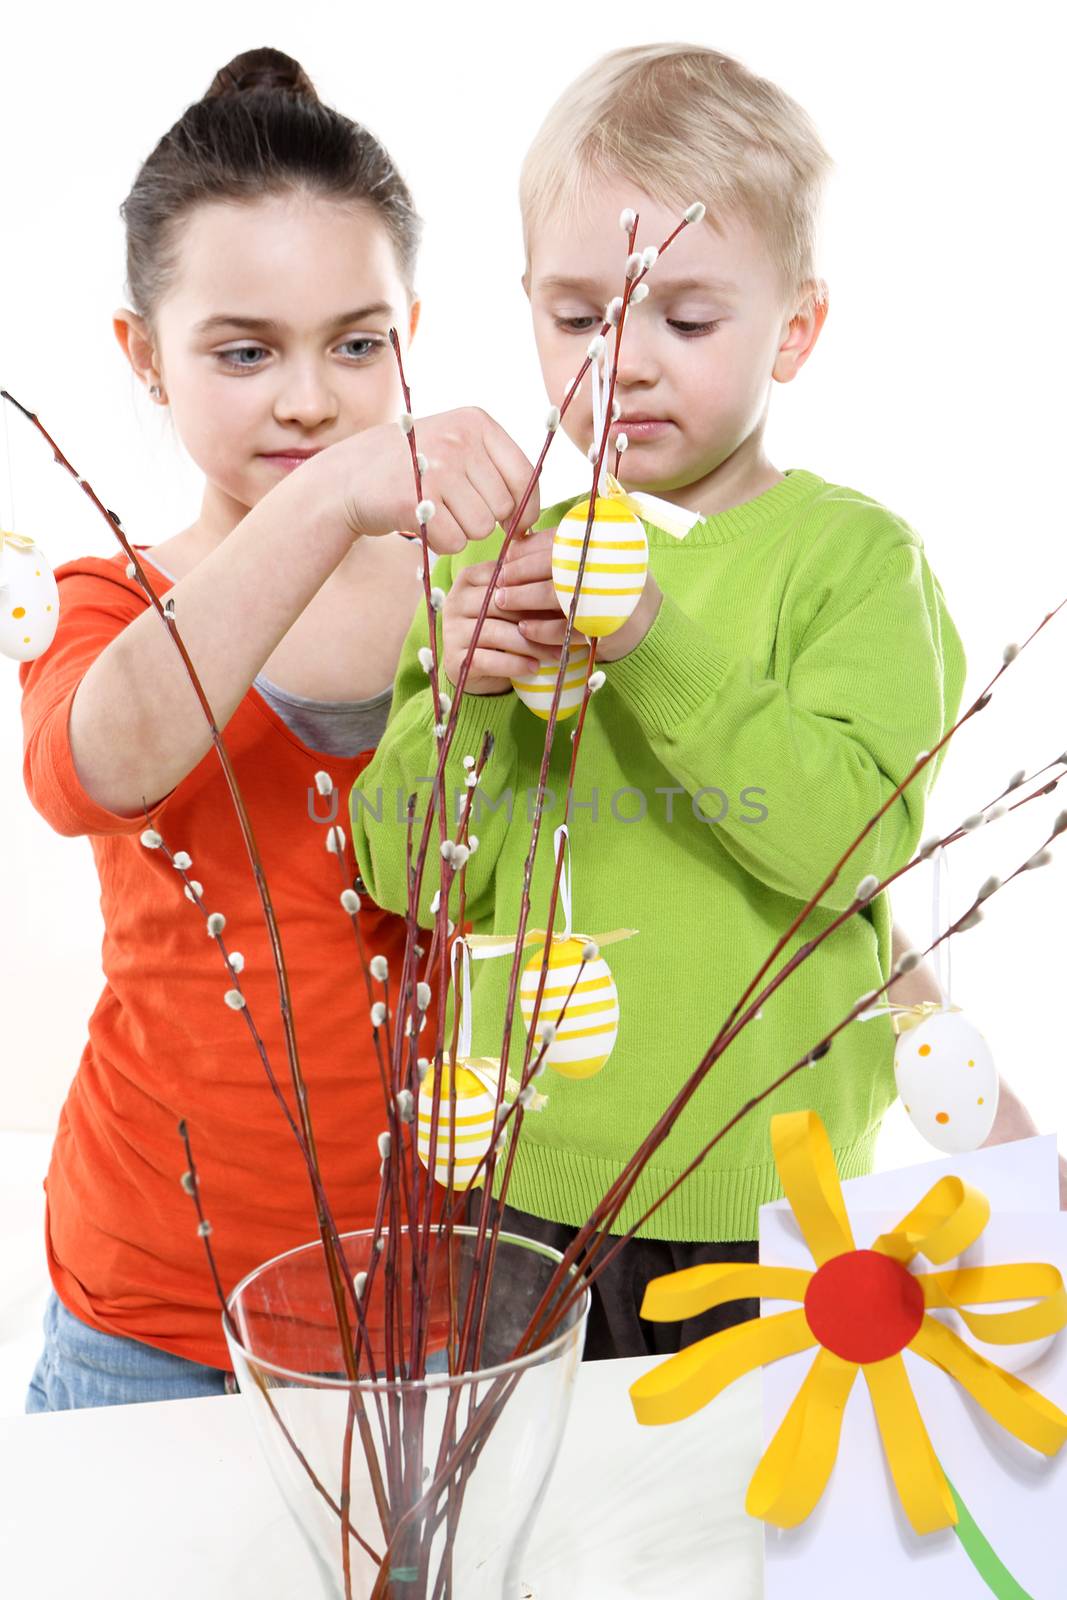 Children boy and girl painting Easter eggs